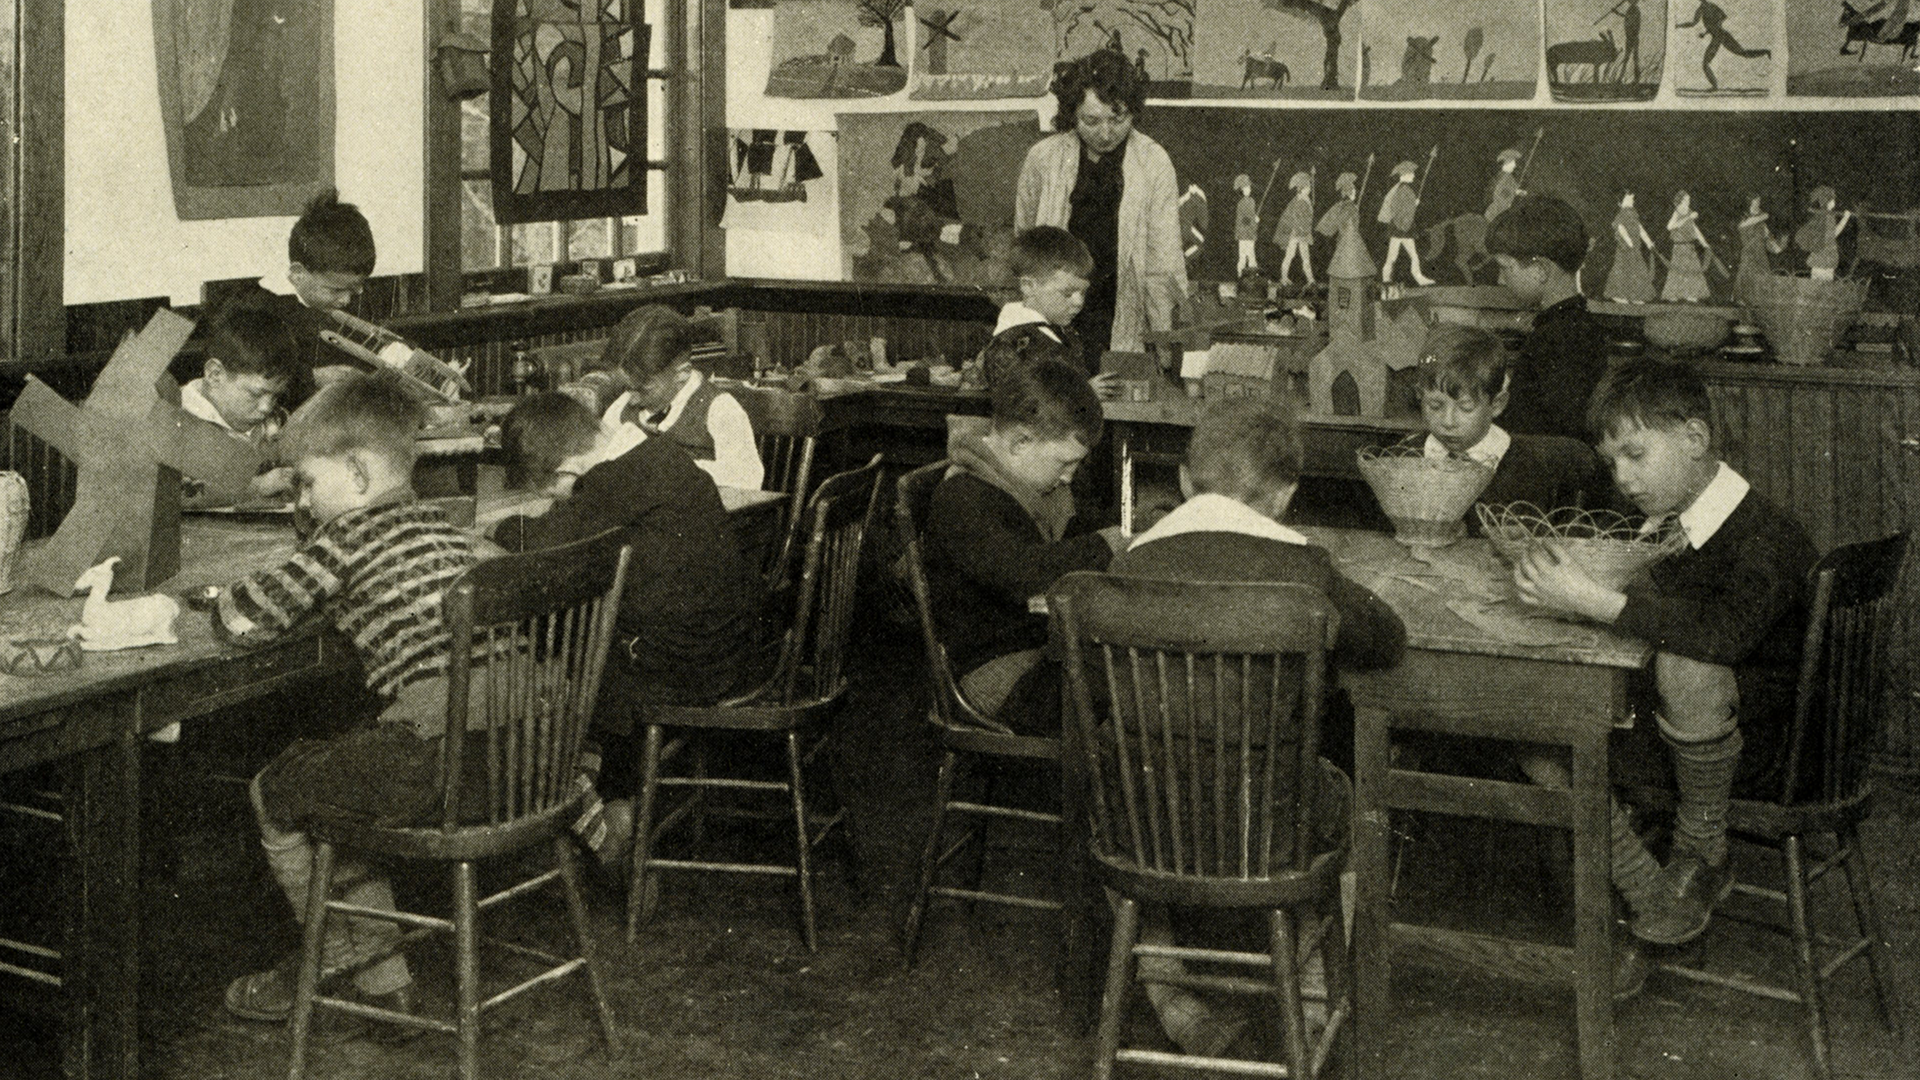 vintage image of students in a classroom